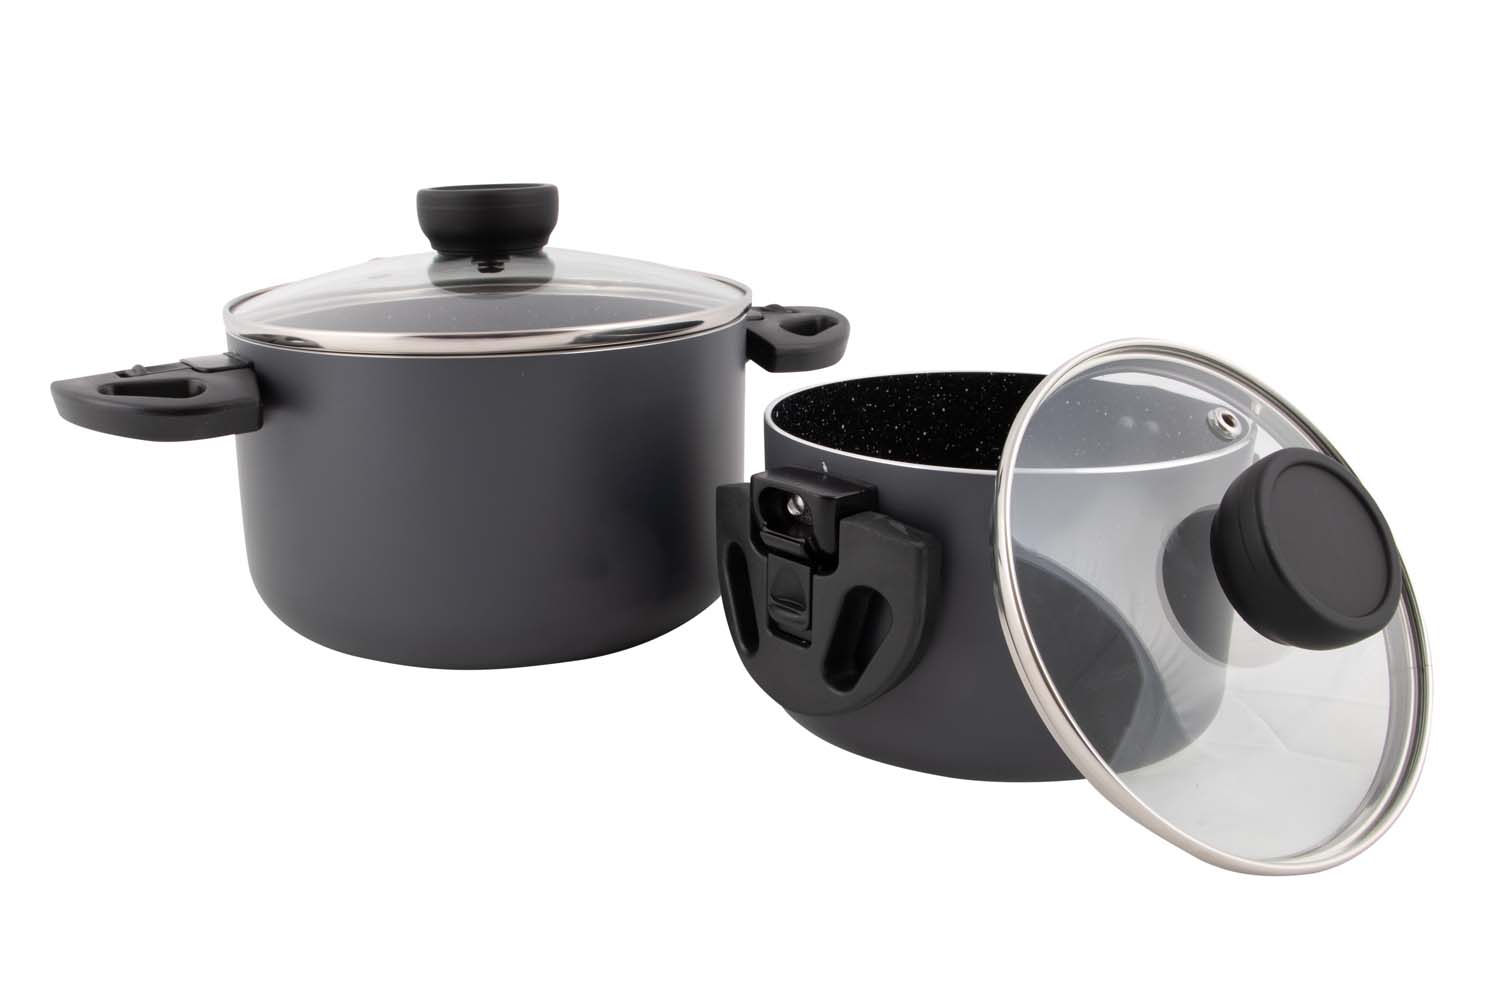 2304482 A anthracite-colored 2-piece cookware set. The ceramic coating prevents sticking, is scratch resistant and easy to clean. In addition, it is healthier cooking because less fat is needed for frying. These cooking pans feature sturdy and heat-resistant fold-away handles. These handles can be easily folded down after use so the pans are fully nestable and compact for storage. The pans also feature a heat-resistant knob on the glass lid. For use on gas, ceramic, electric and induction. Dimensions (Øxh): 14x8 (1.2 L), 18x11 (2.8 L)